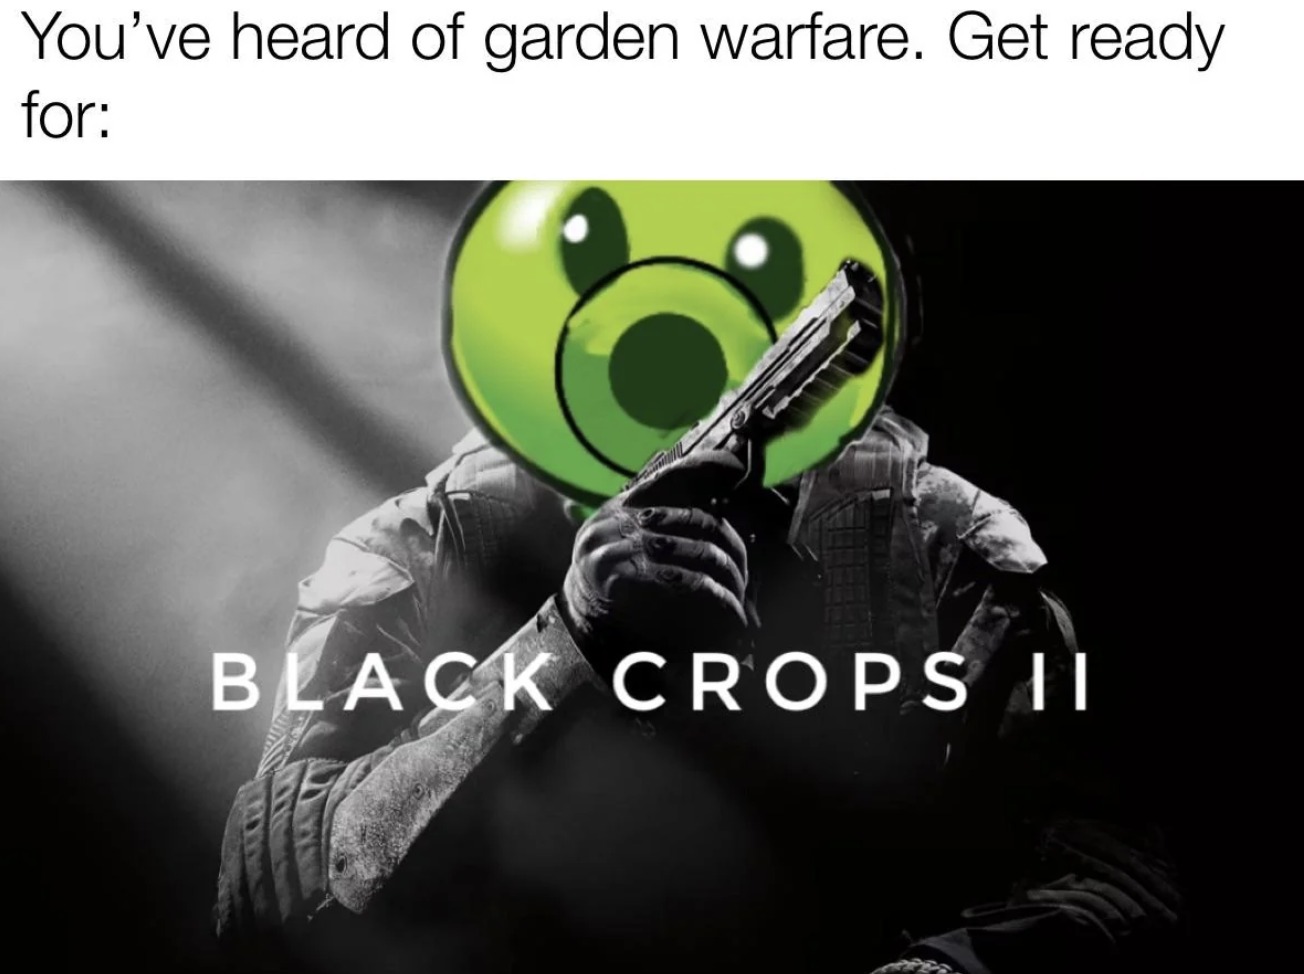 call of duty black ops 2 profile - You've heard of garden warfare. Get ready for Black Crops I|